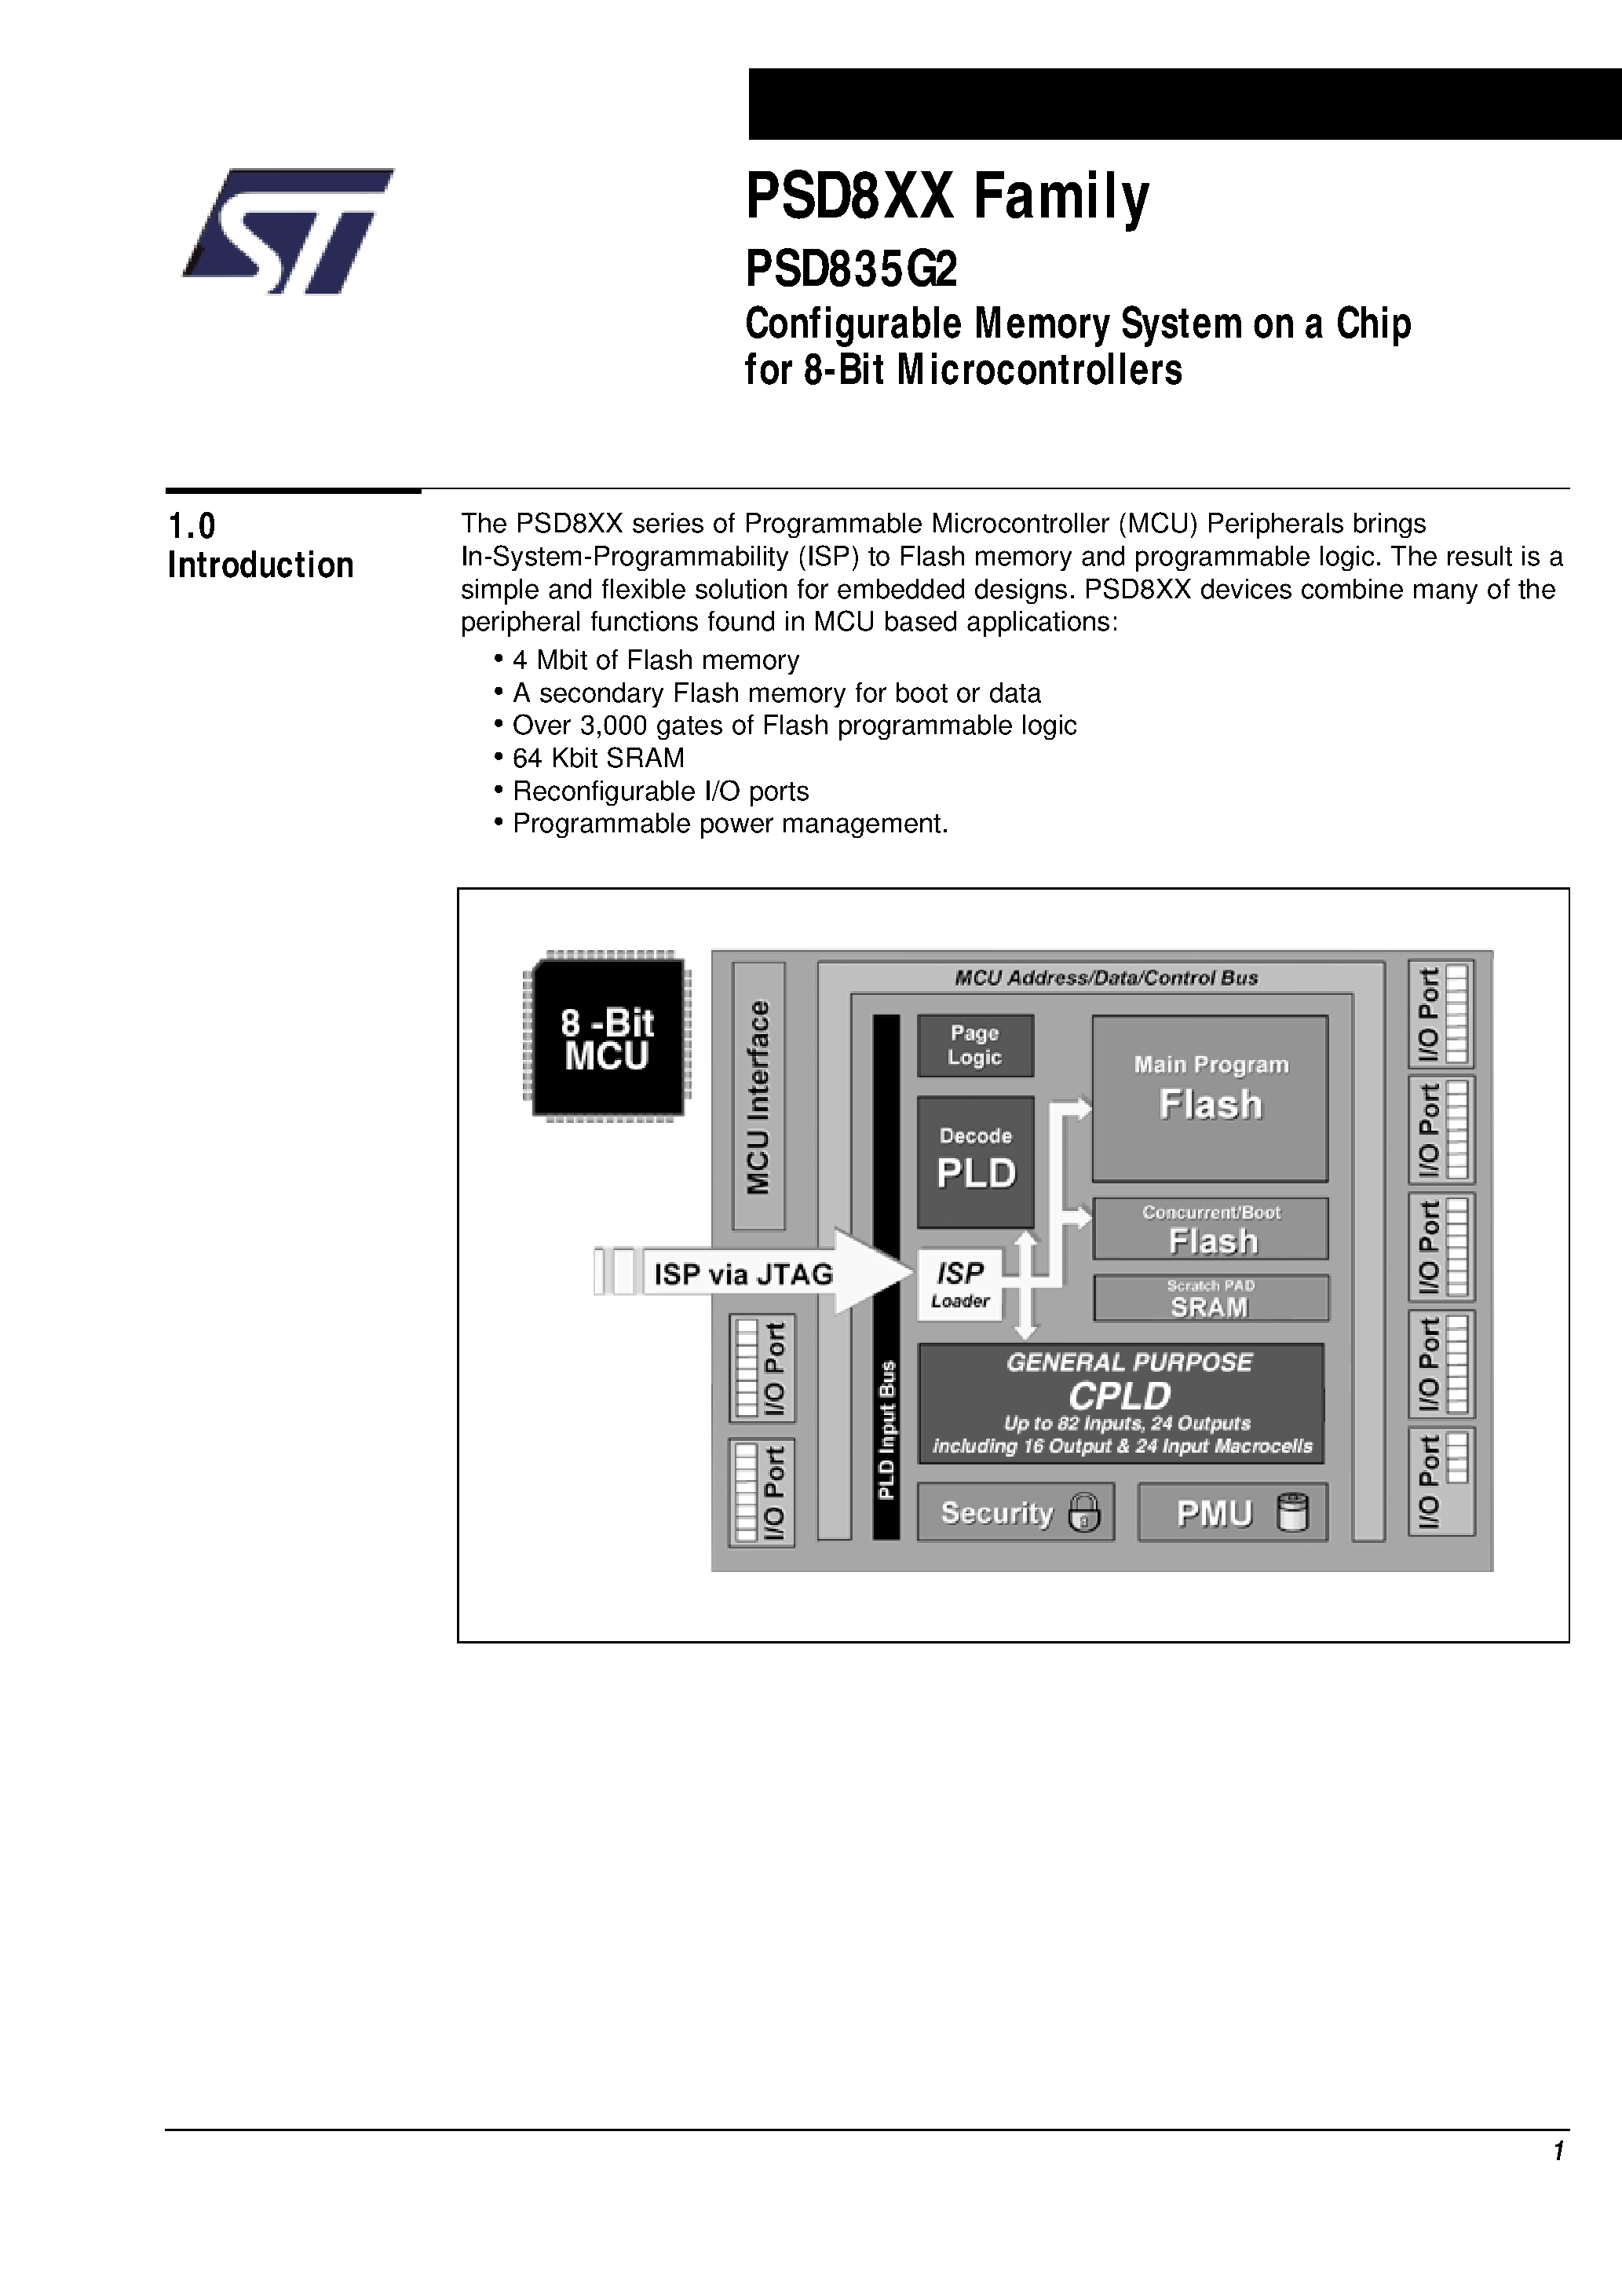 Datasheet PSD835F1-A-15M - Configurable Memory System on a Chip for 8-Bit Microcontrollers page 2